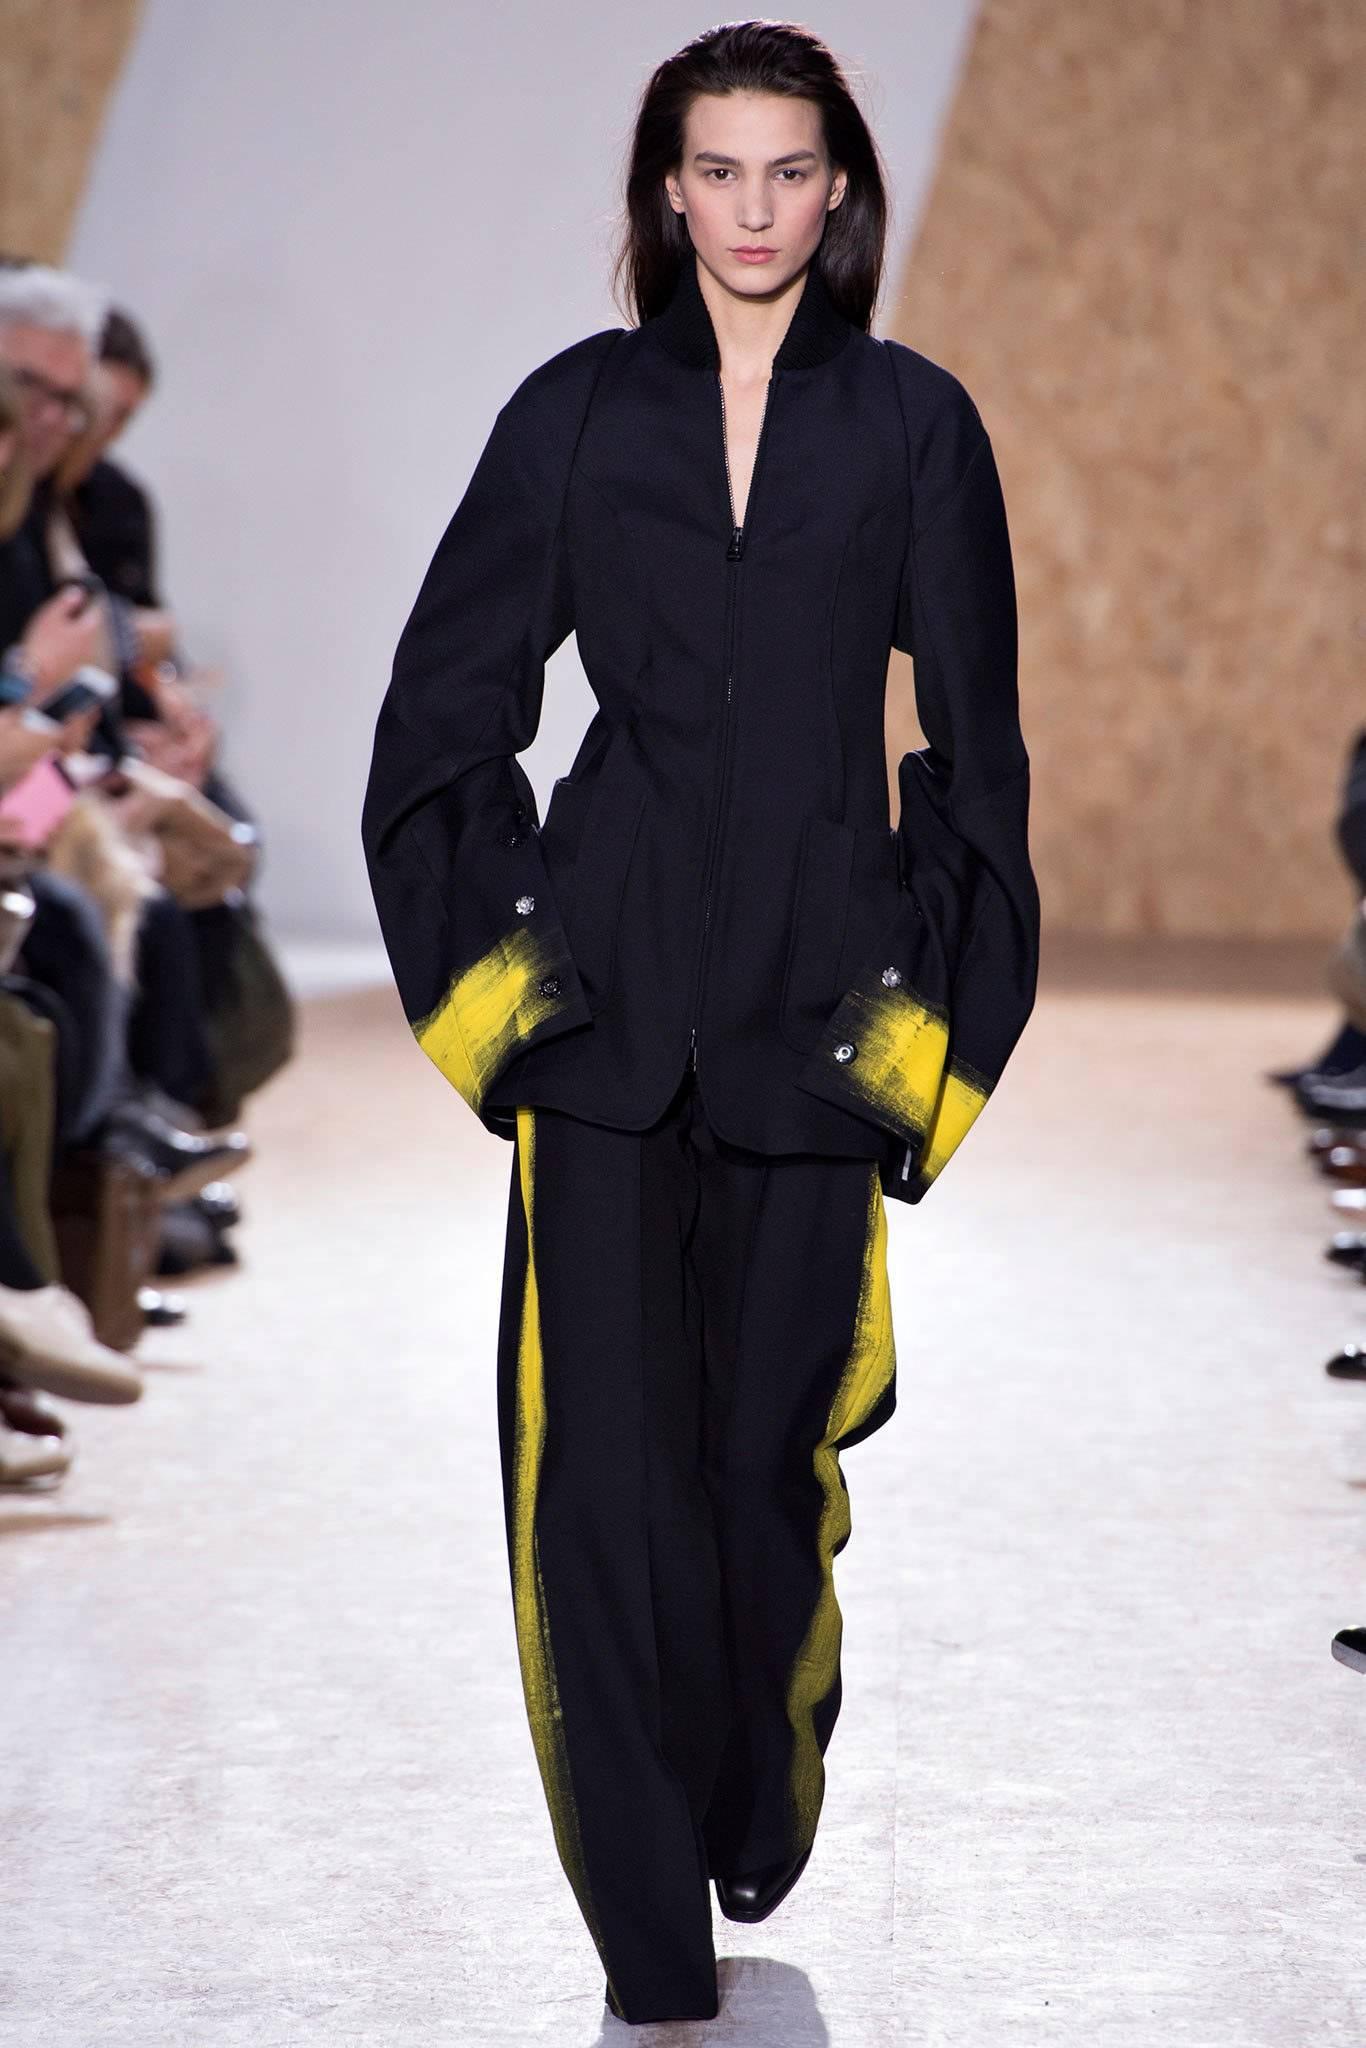 Maison Martin Margiela fall 2013 lead runway jacket. Matching runway trouser available in a separate 1stdibs listing. Black avant garde jacket with zippered front and extra long exaggerated sleeves with yellow painted snap cuffs. Excellent pre-owned